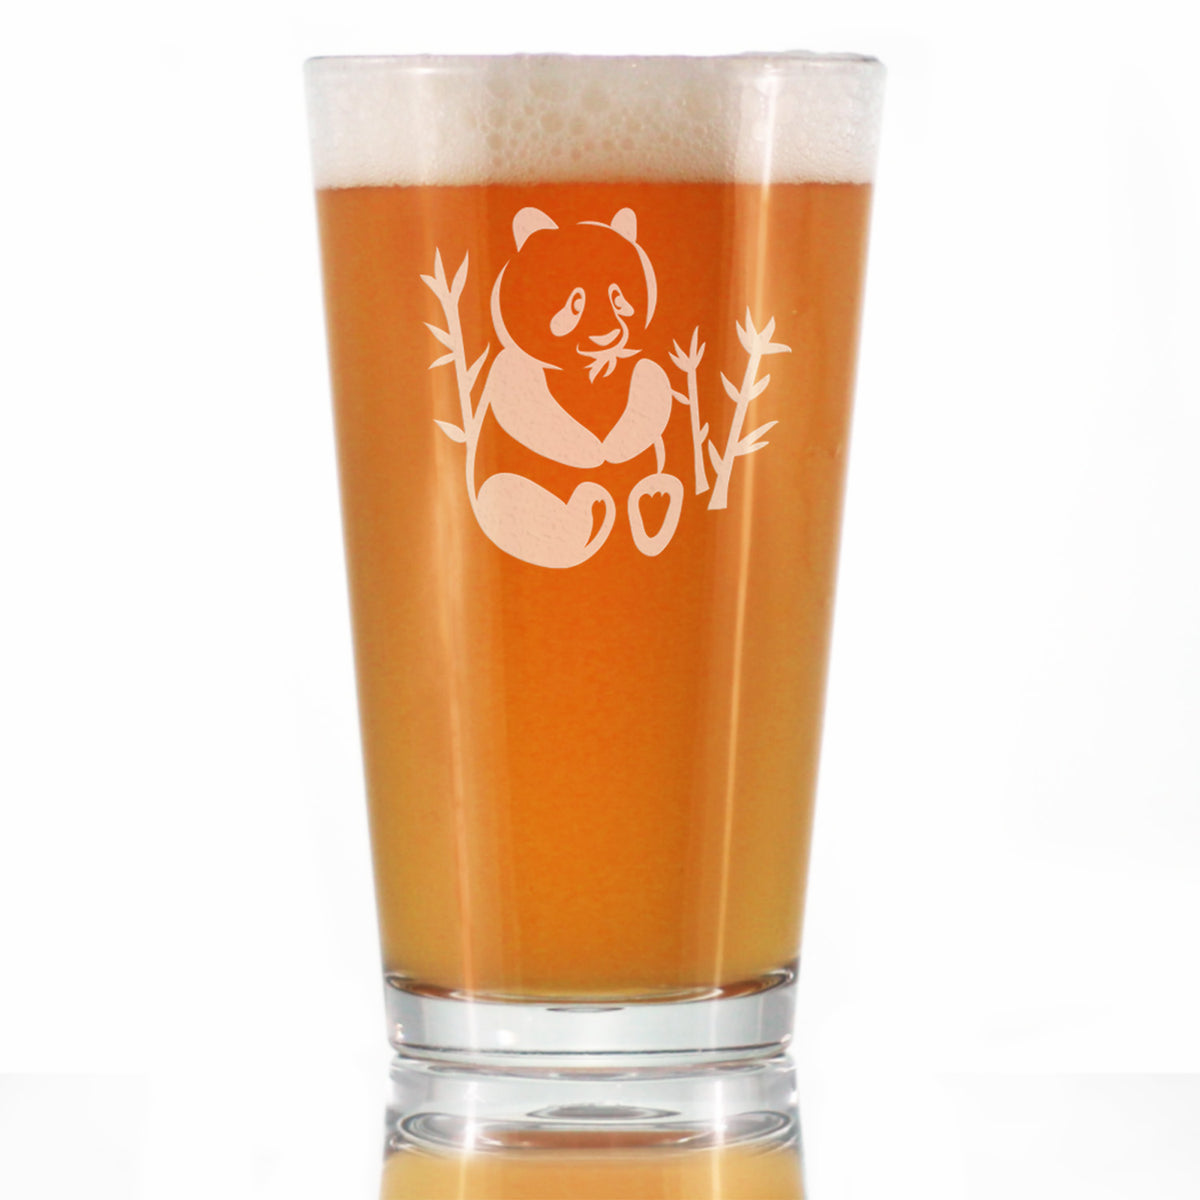 Panda Pint Glass for Beer - Unique Panda Themed Decor and Gifts for Panda Bears - 16 Oz Glasses